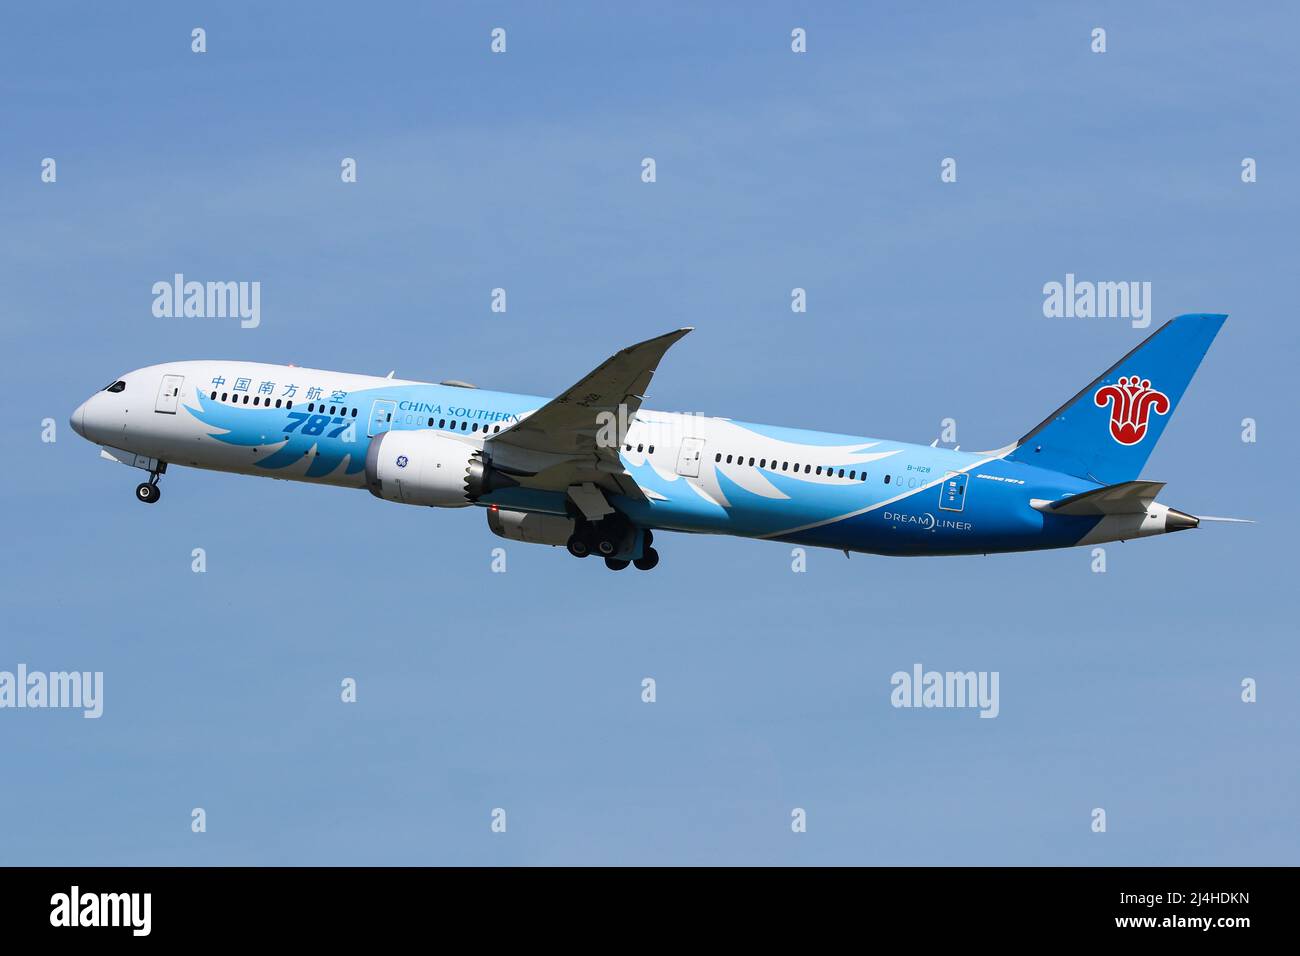 A Boeing 787 operated by China Southern Airlines departs from London Heathrow Airport Stock Photo